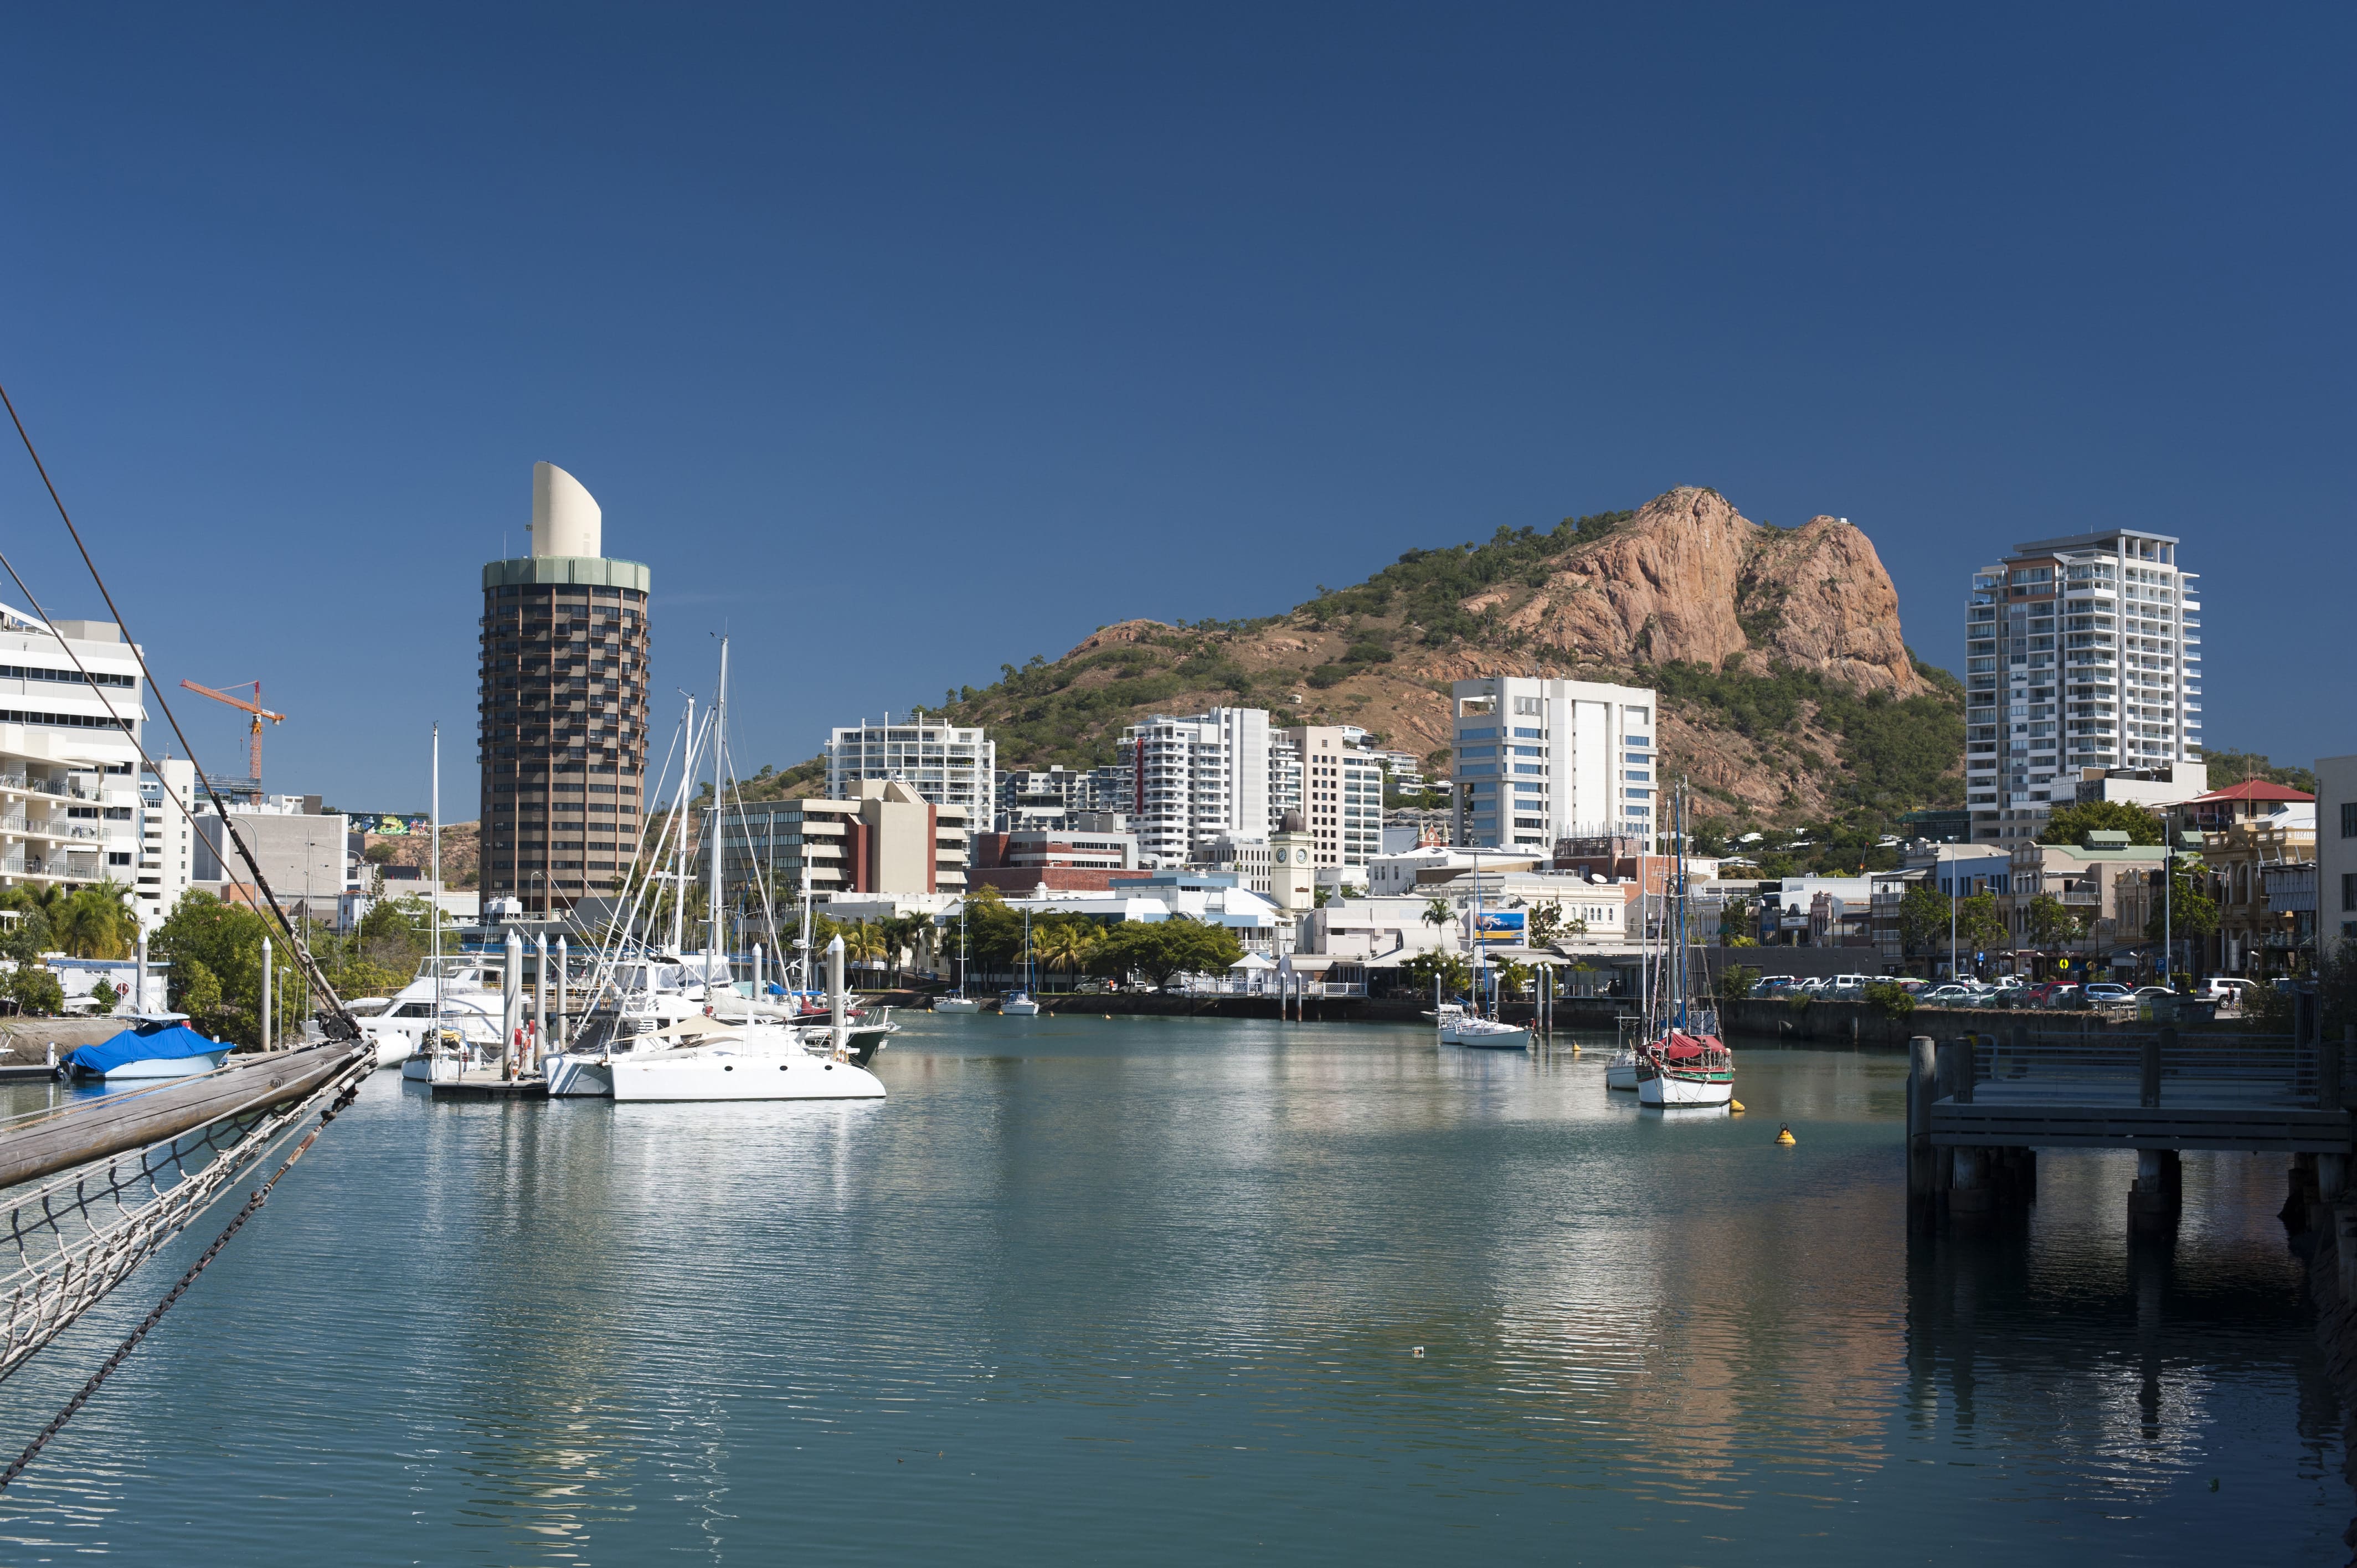 Townsville city from Ross Creek with Sugar Shaker and Castle Hill in the background